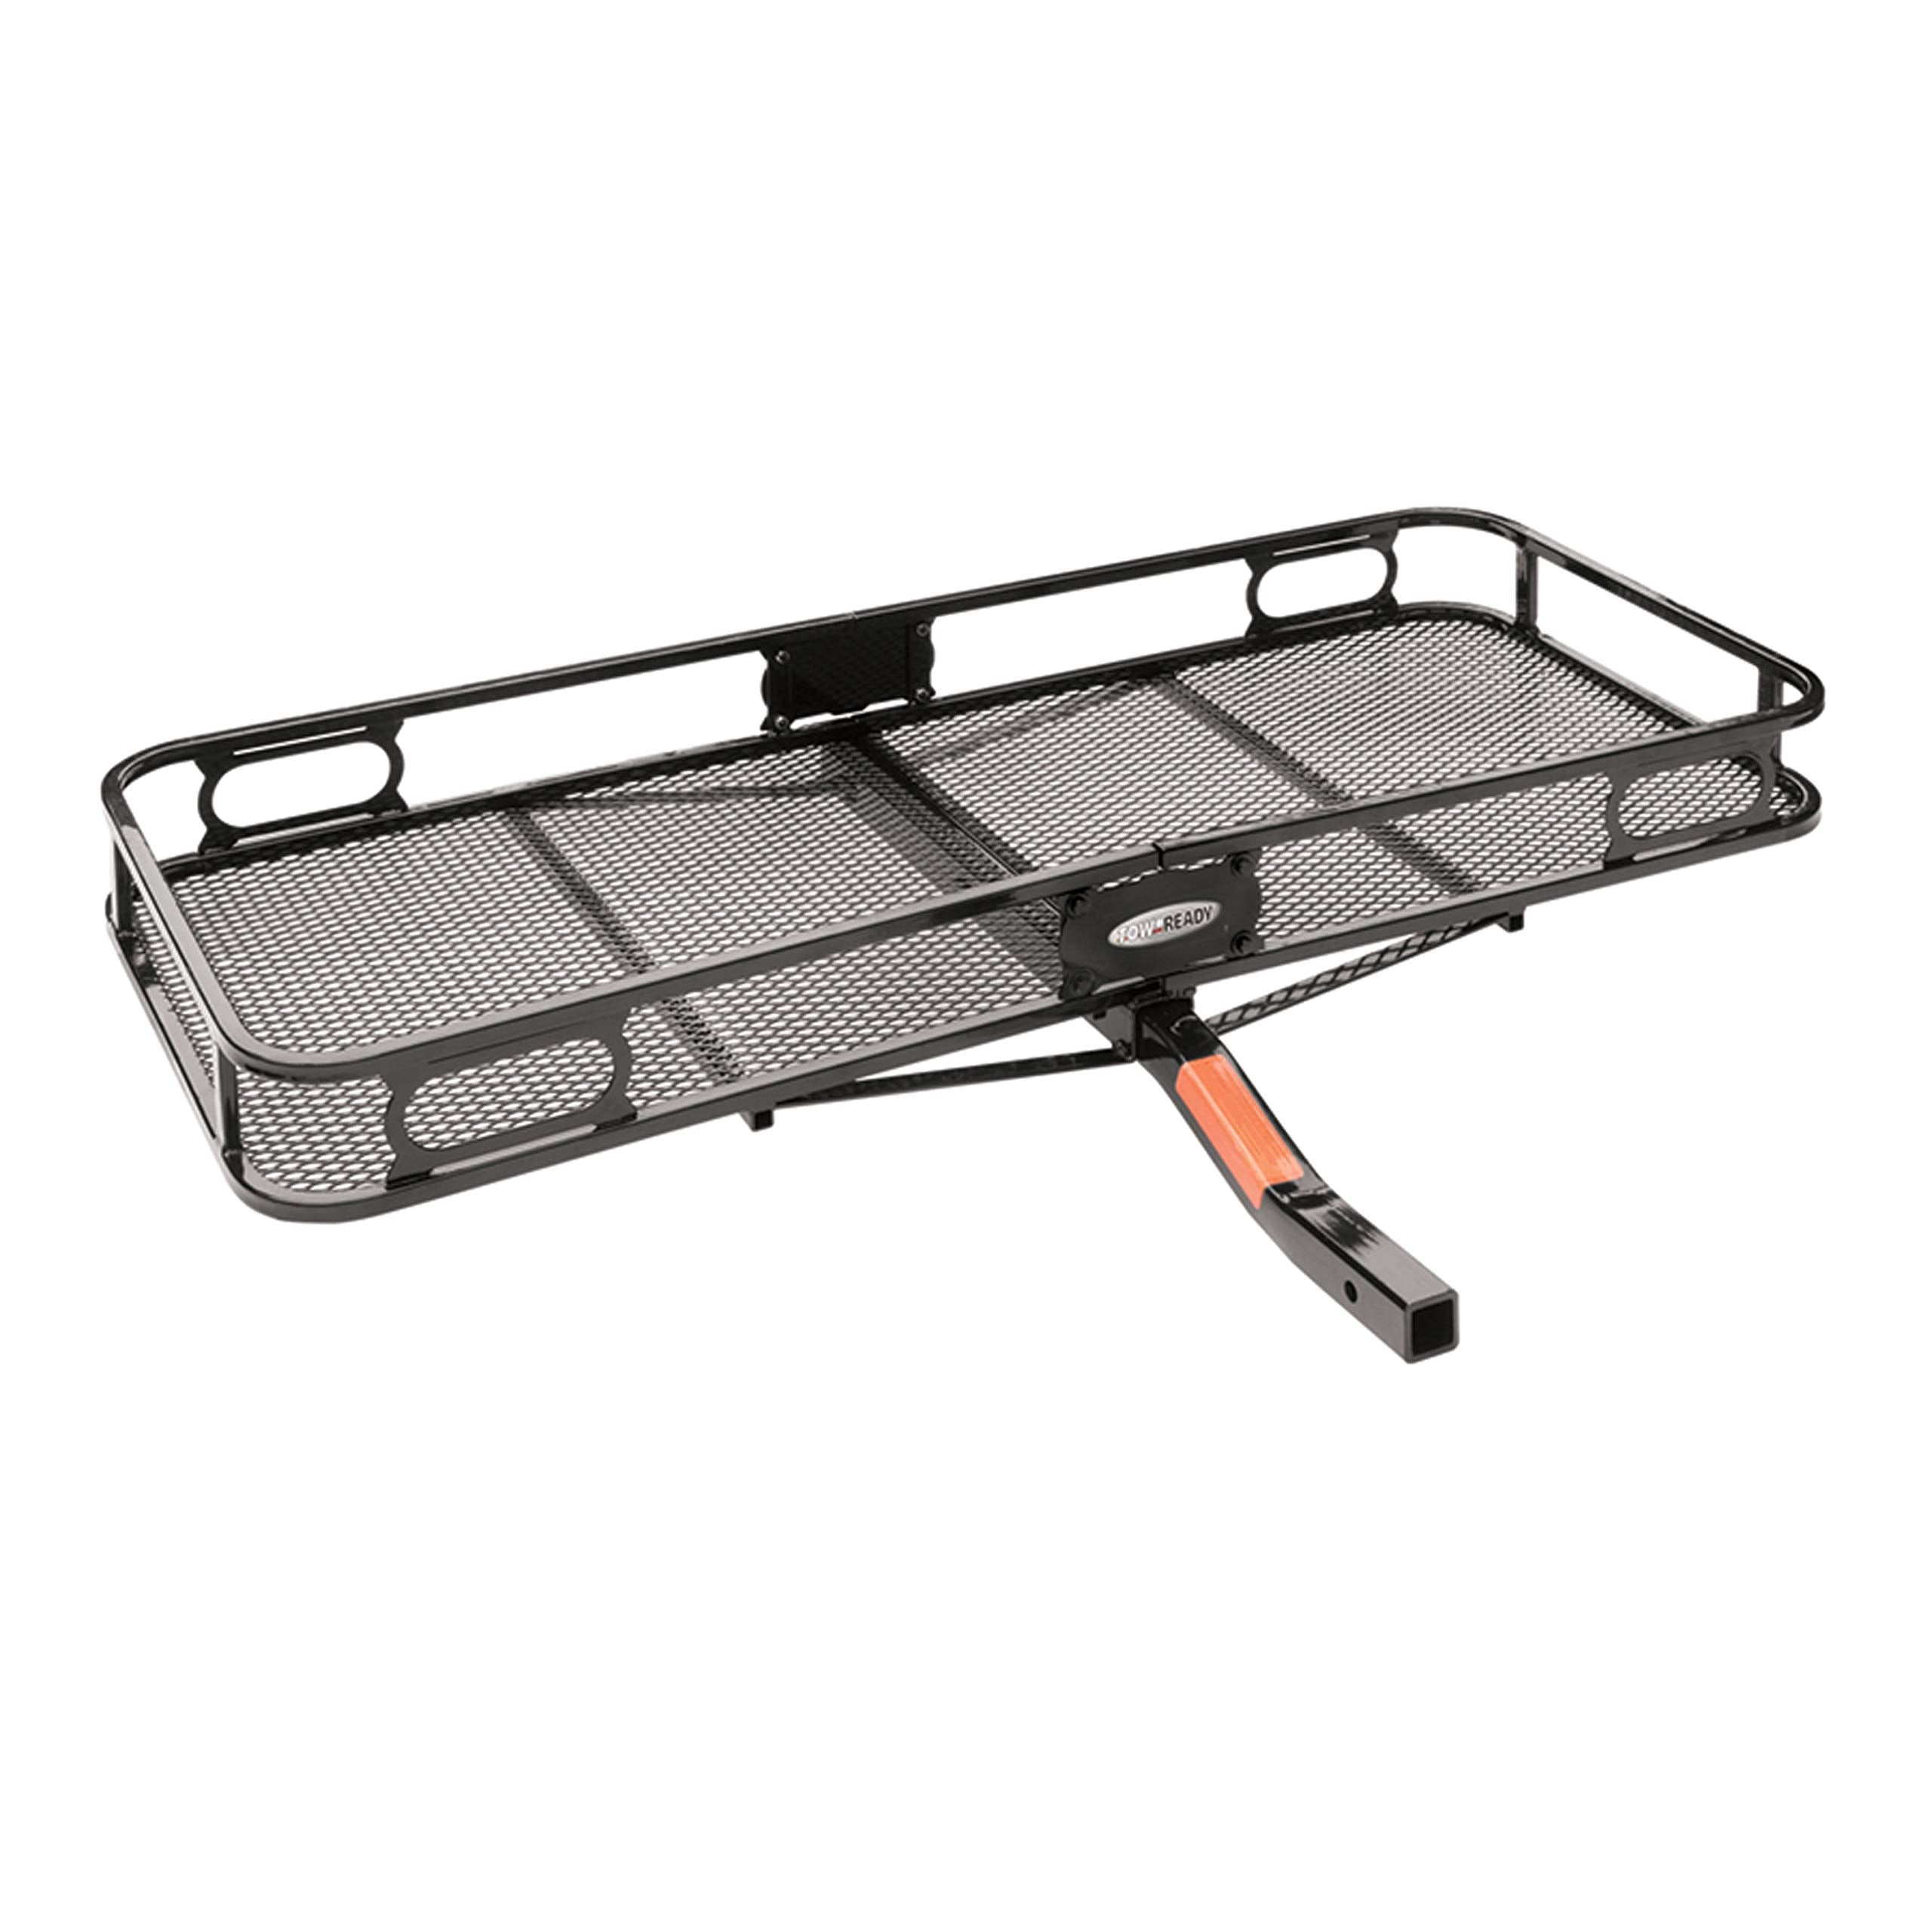 Pro Series 63152 Rambler Hitch Cargo Carrier for 2 Receivers, Black